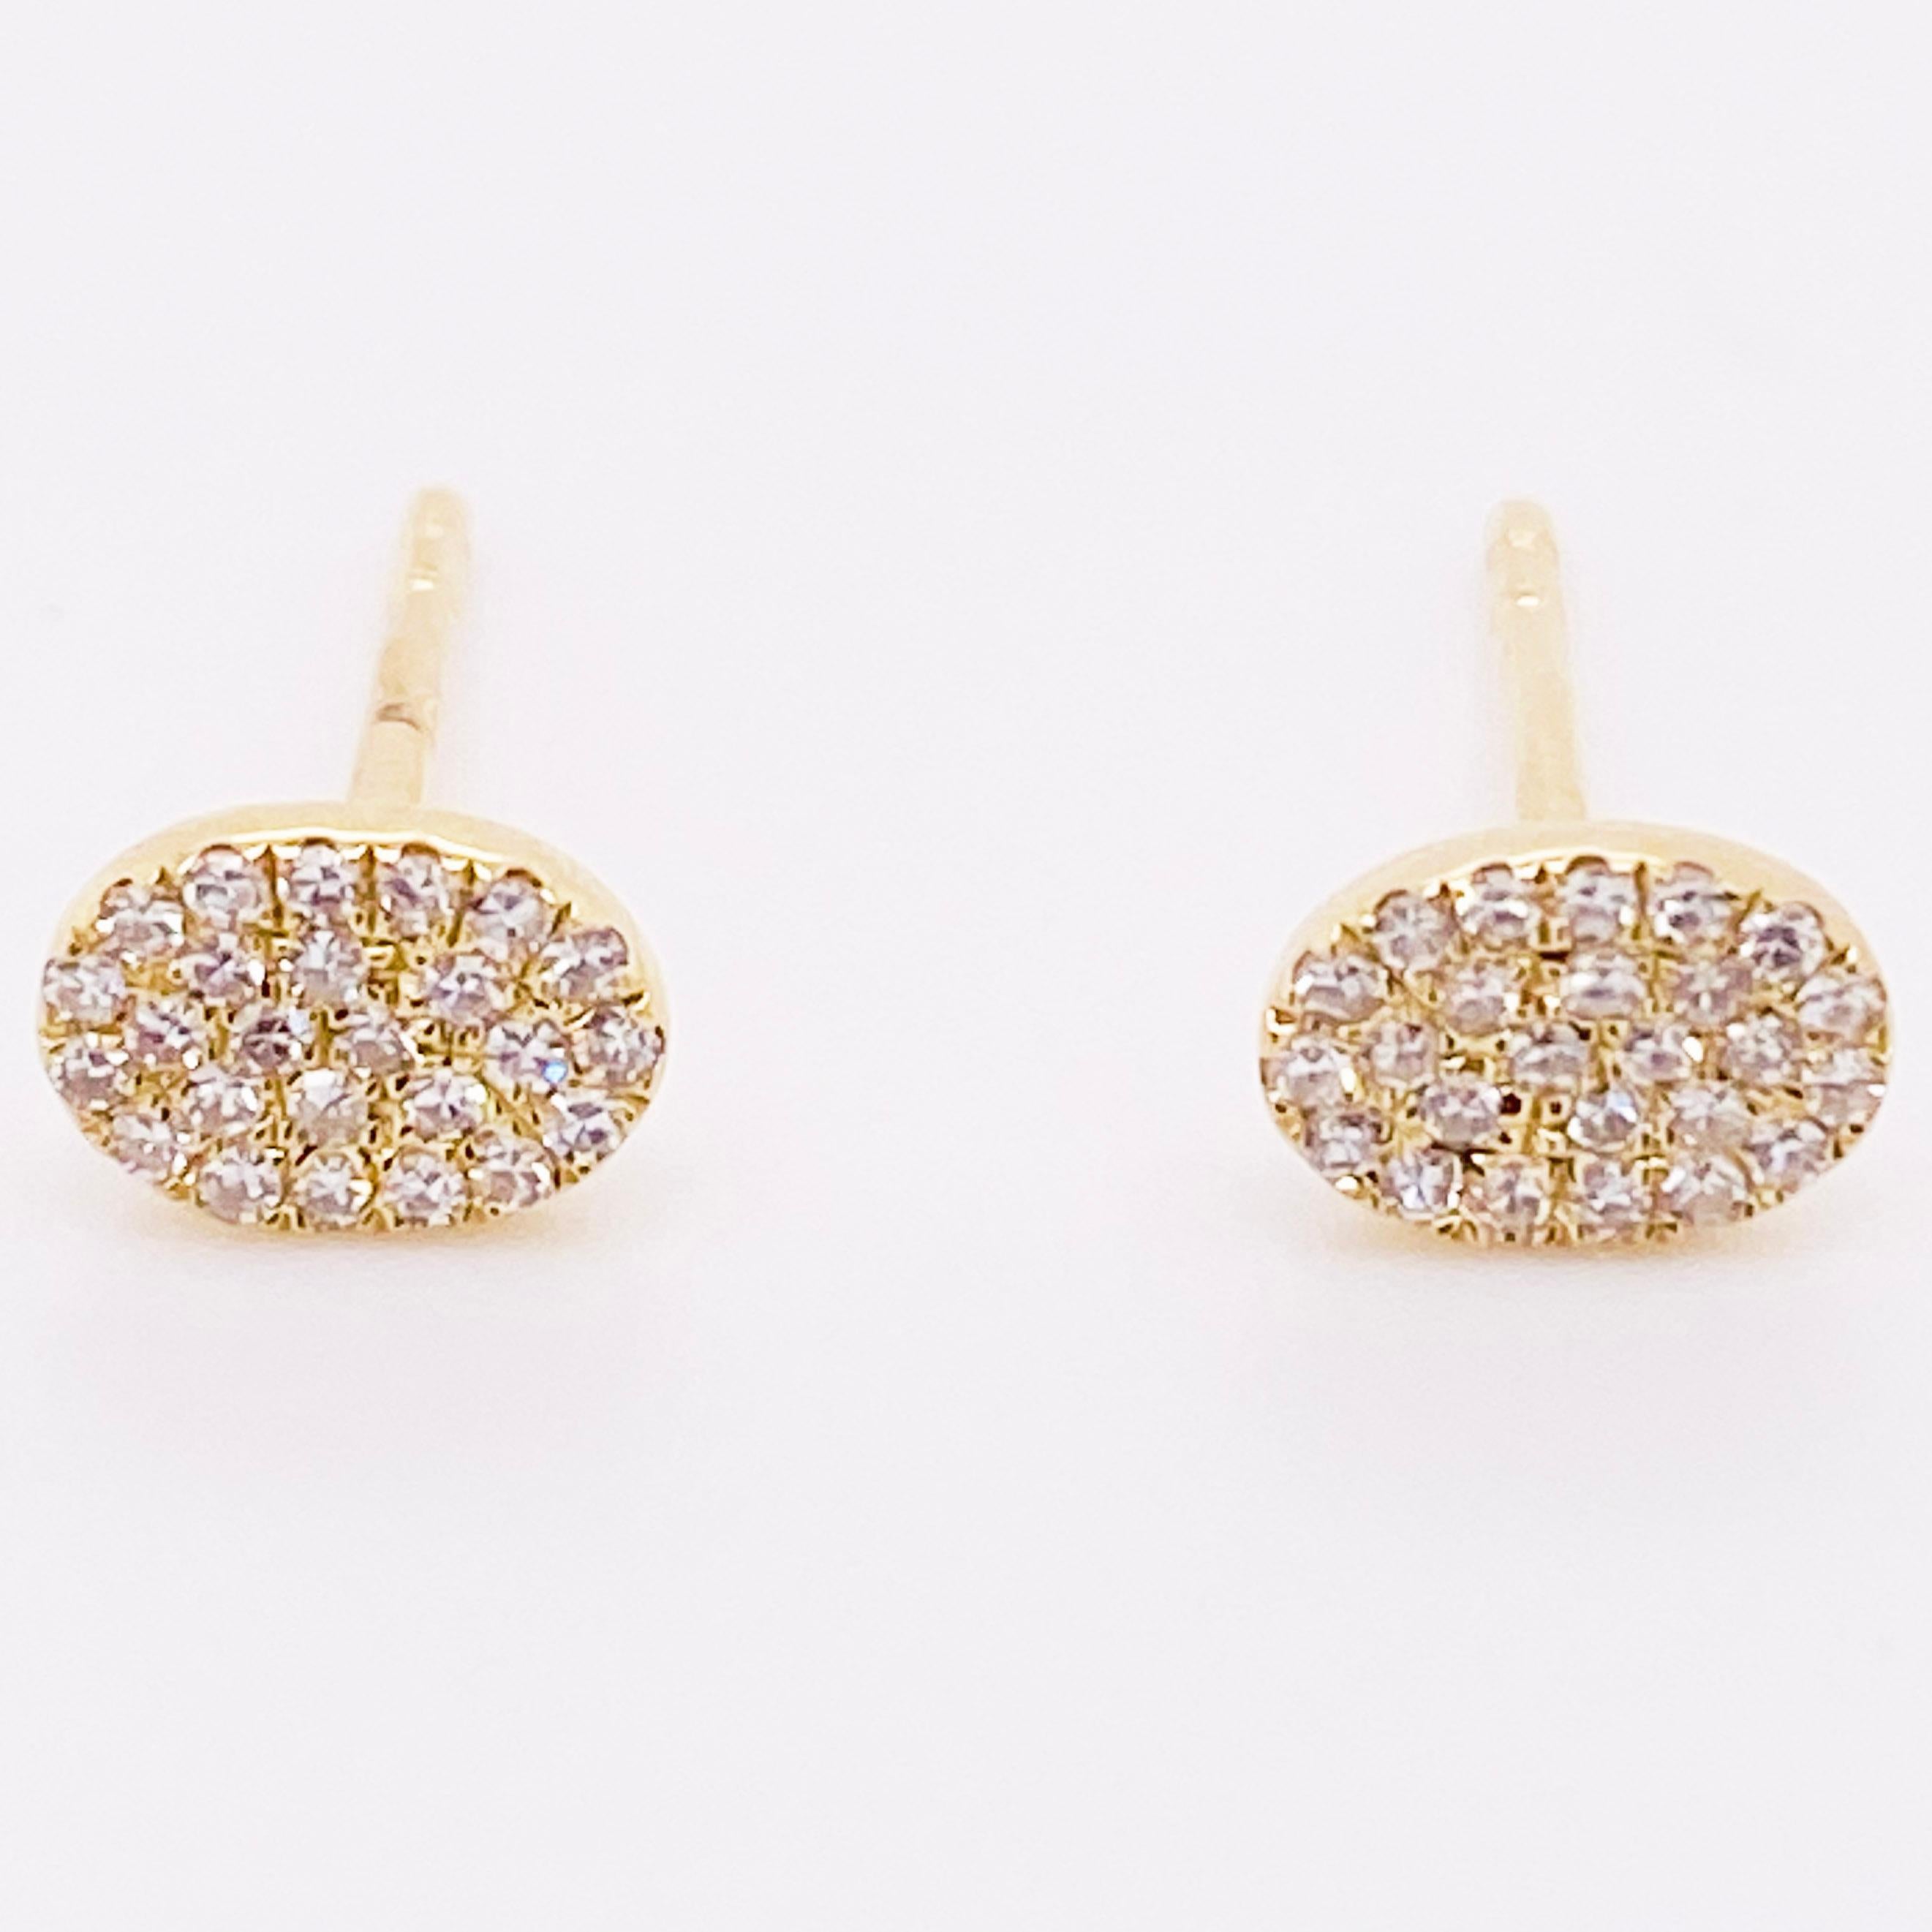 Modern Pave Diamond Earrings, Yellow Gold Oval Pave Studs, Diamond Studs For Sale